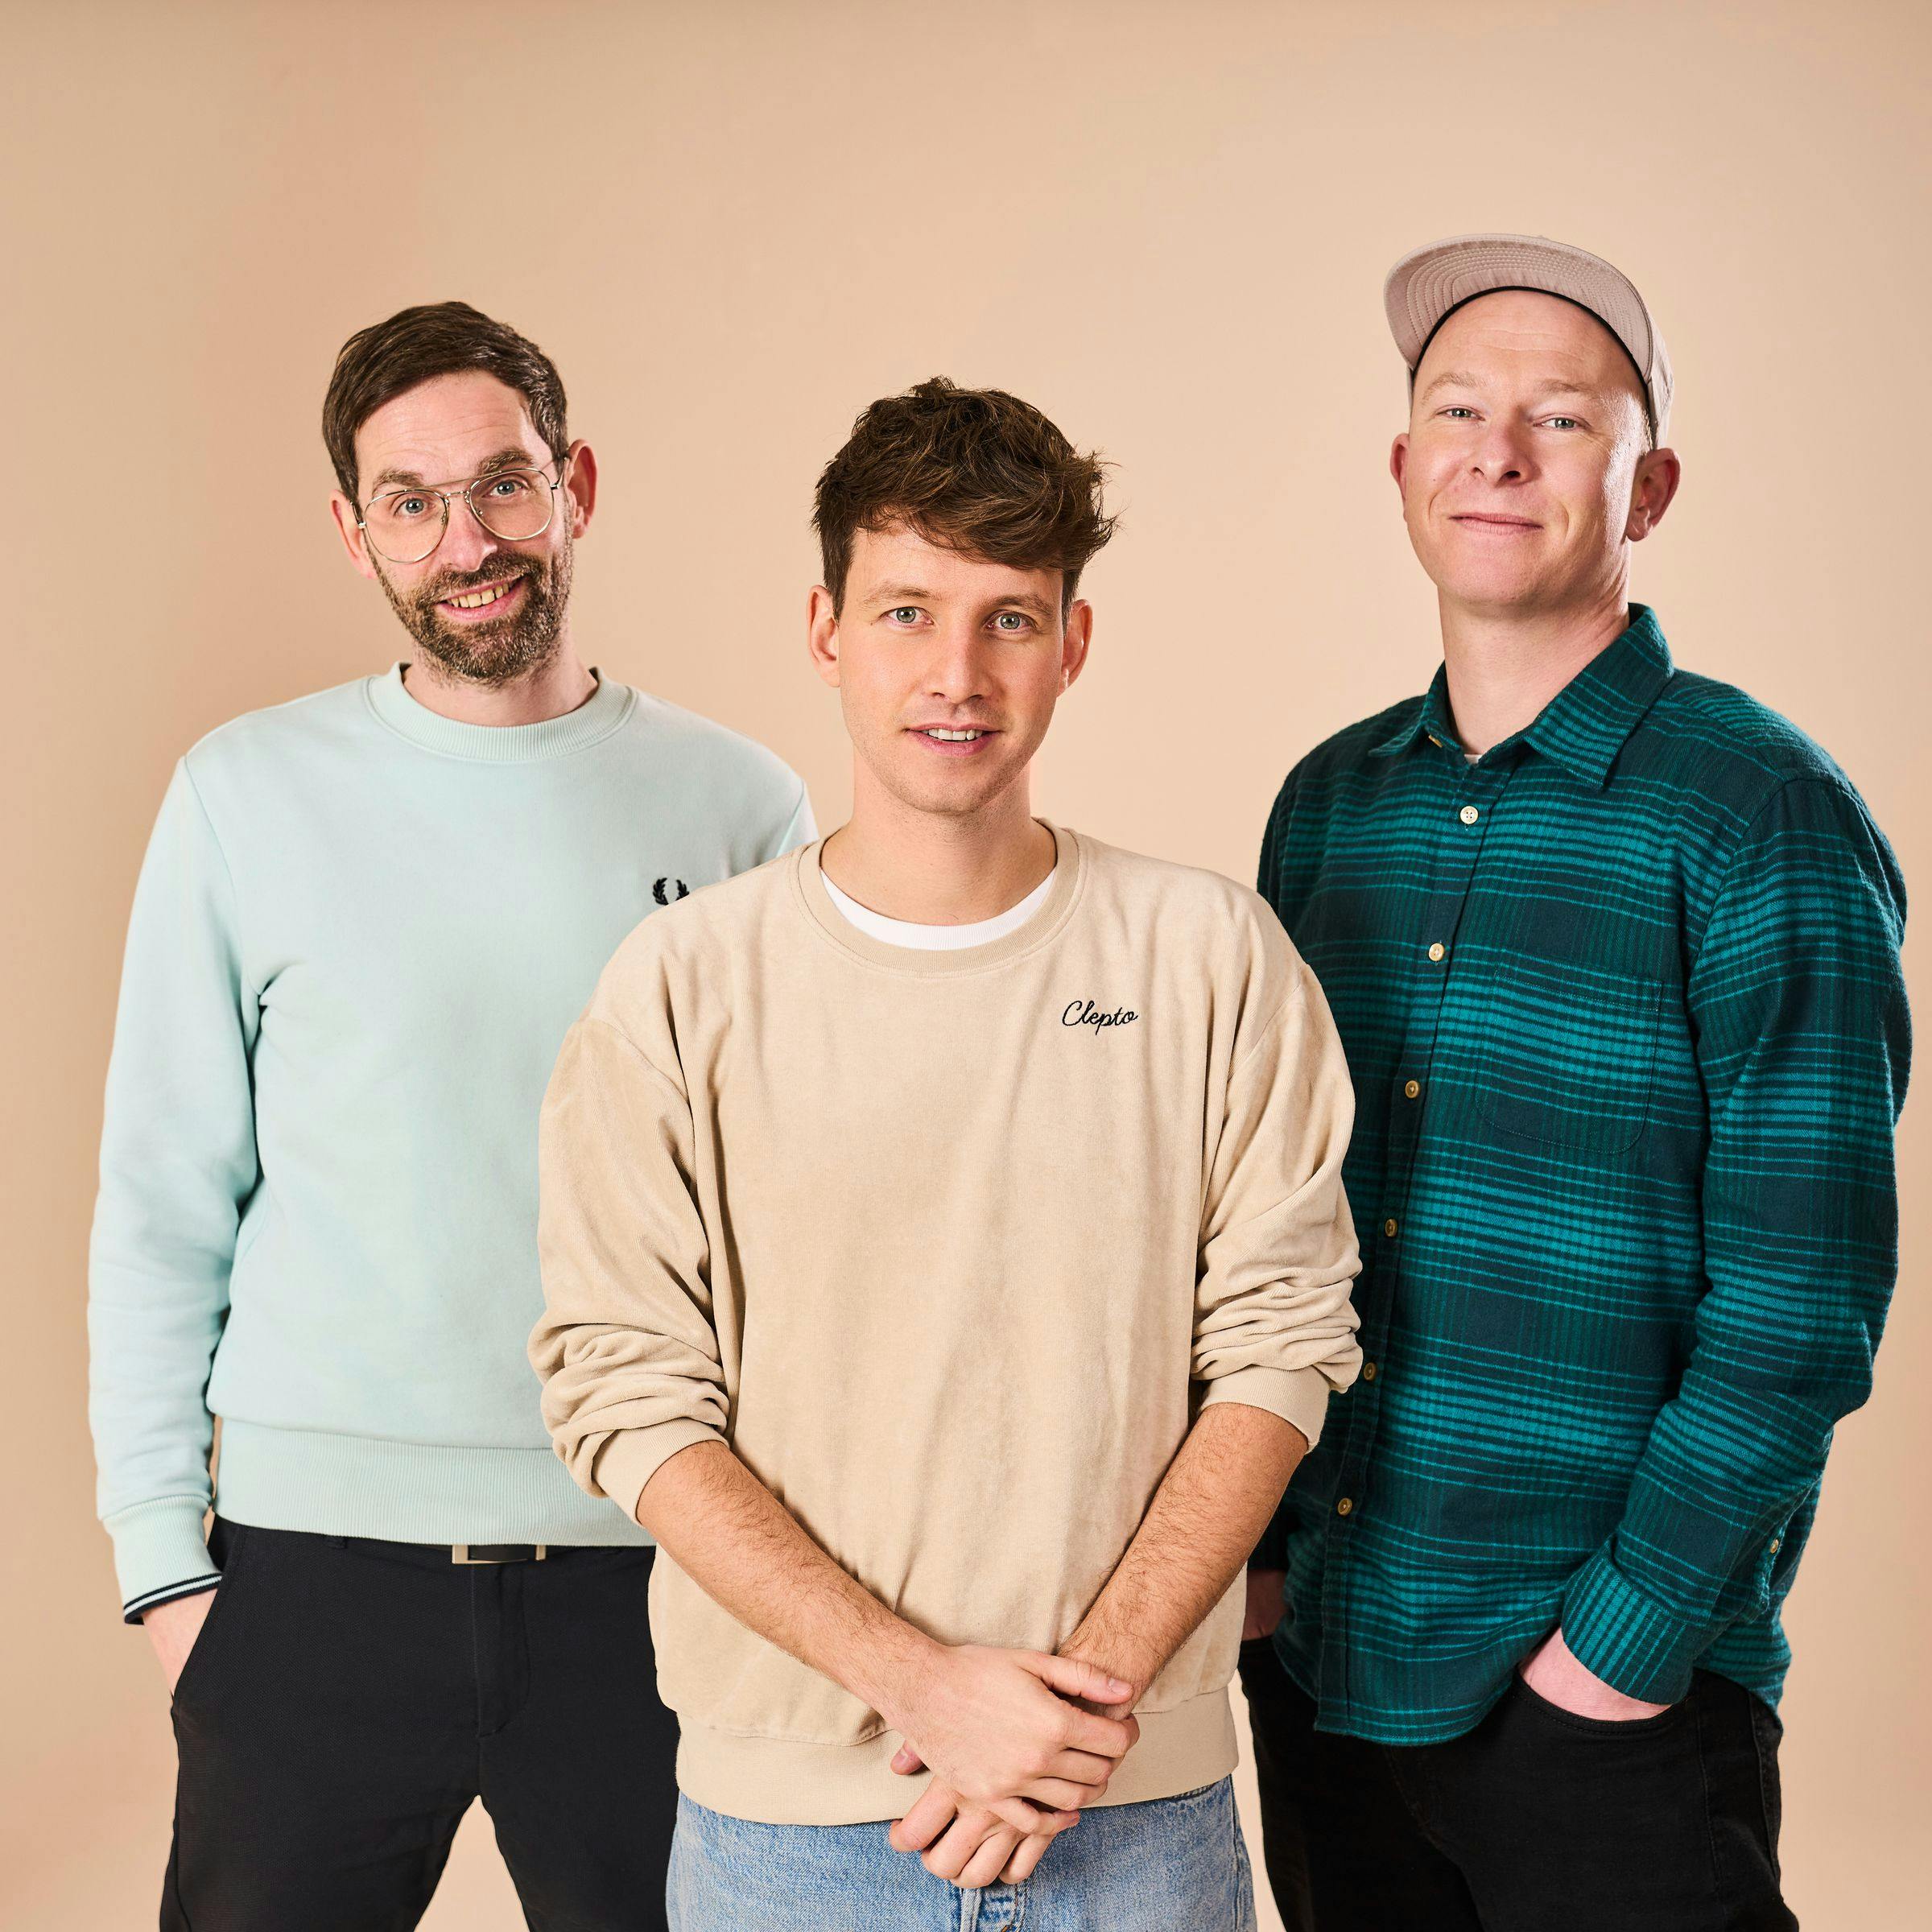 All three members of Deine Freunde are standing side by side in front of a beige-orange wall, looking amiably into the camera.